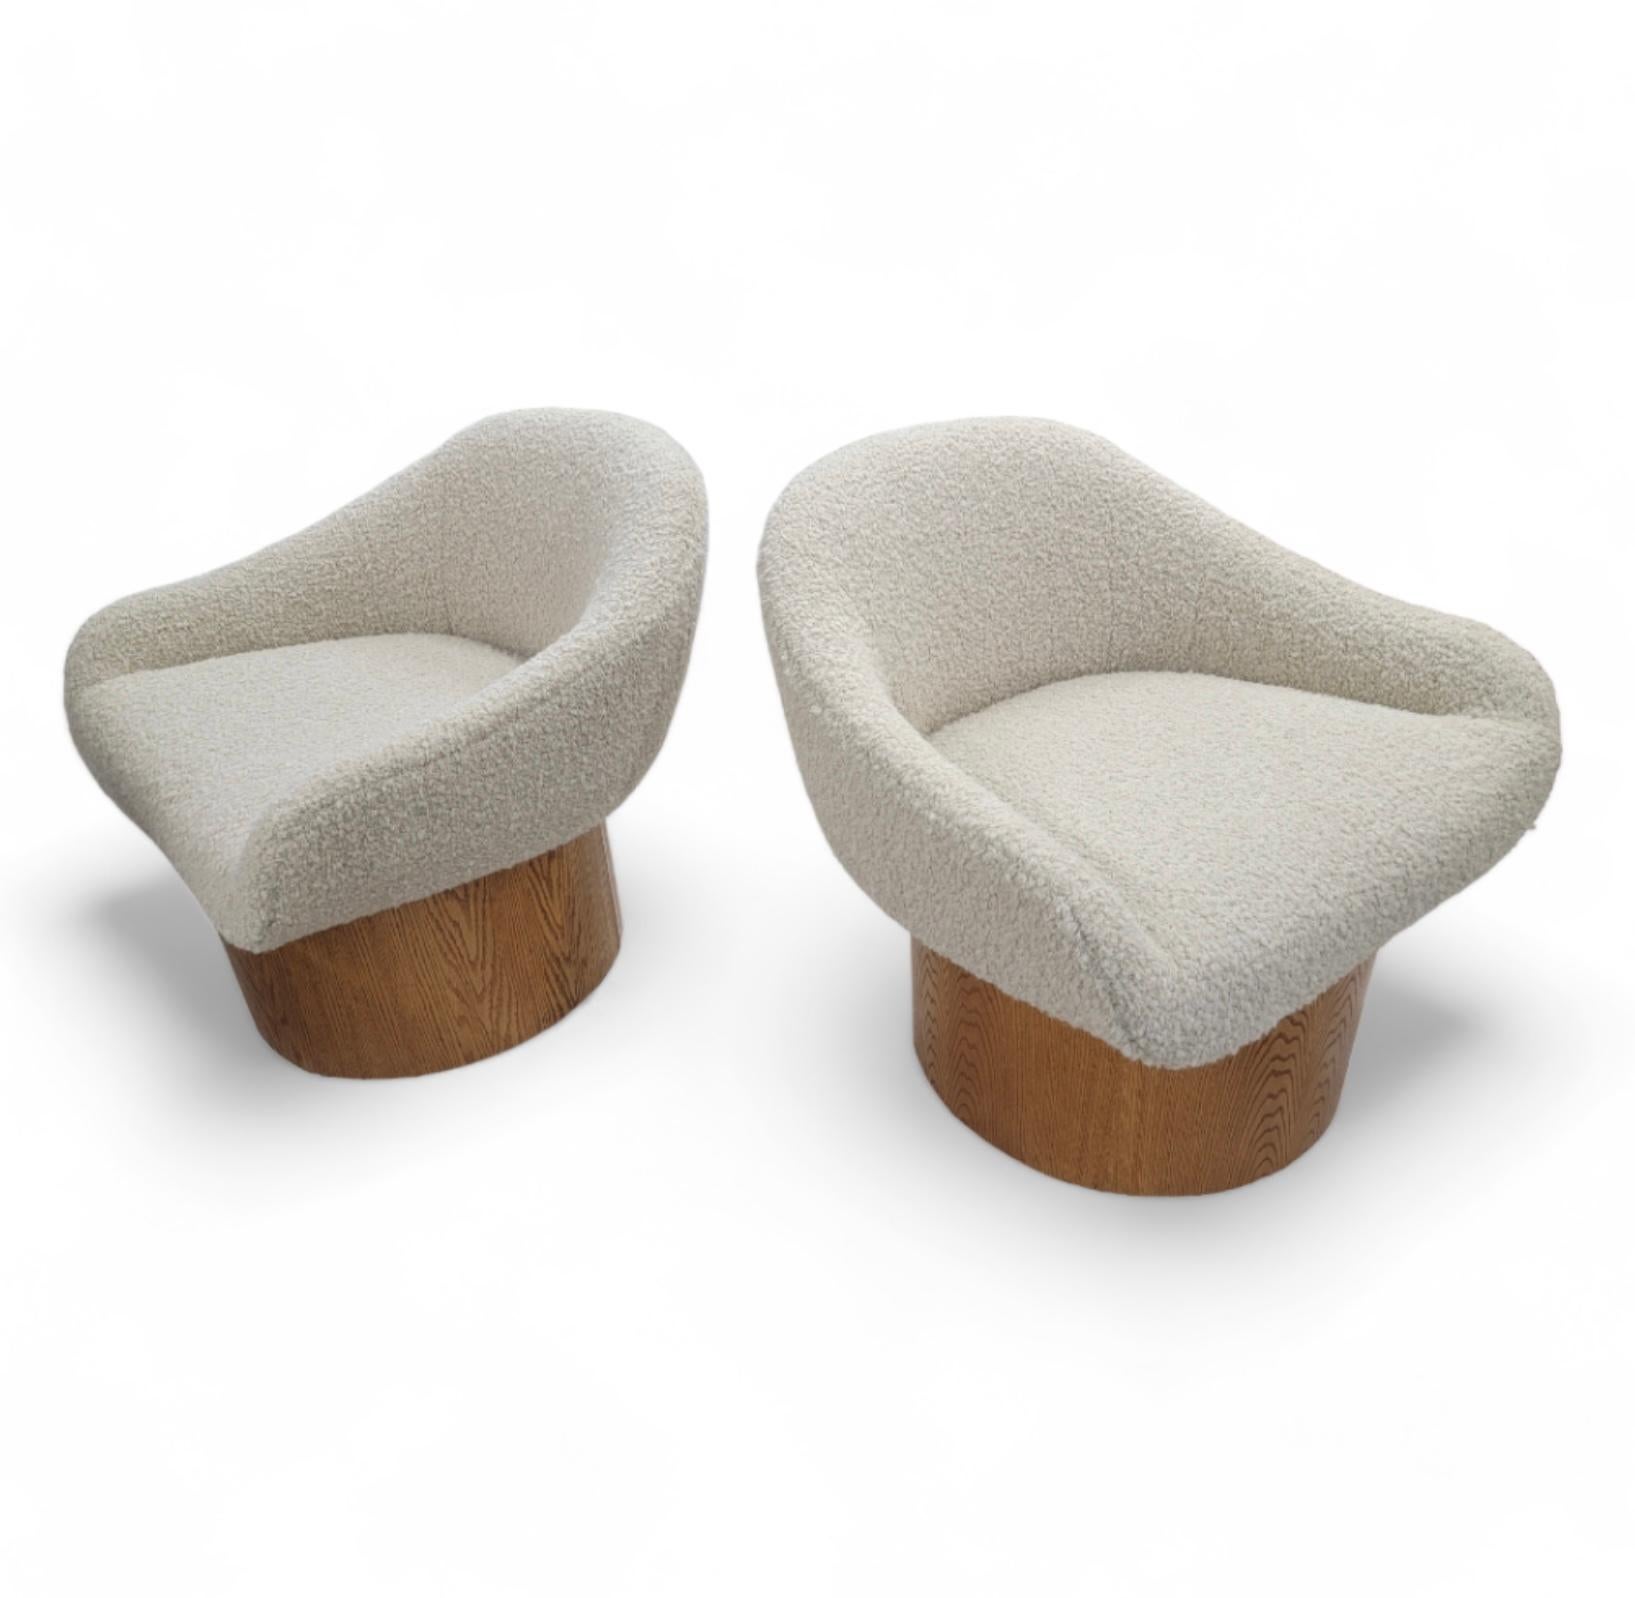 Vintage Modern Milo Baughman Style High Barrel Base Curved Arm Lounges Newly Upholstered In Sand Boucle - Pair

The Vintage Modern Set of Milo Baughman Styled High Barrel Base Curved Arm Lounges Newly Upholstered In Sand Boucle is a stunning blend